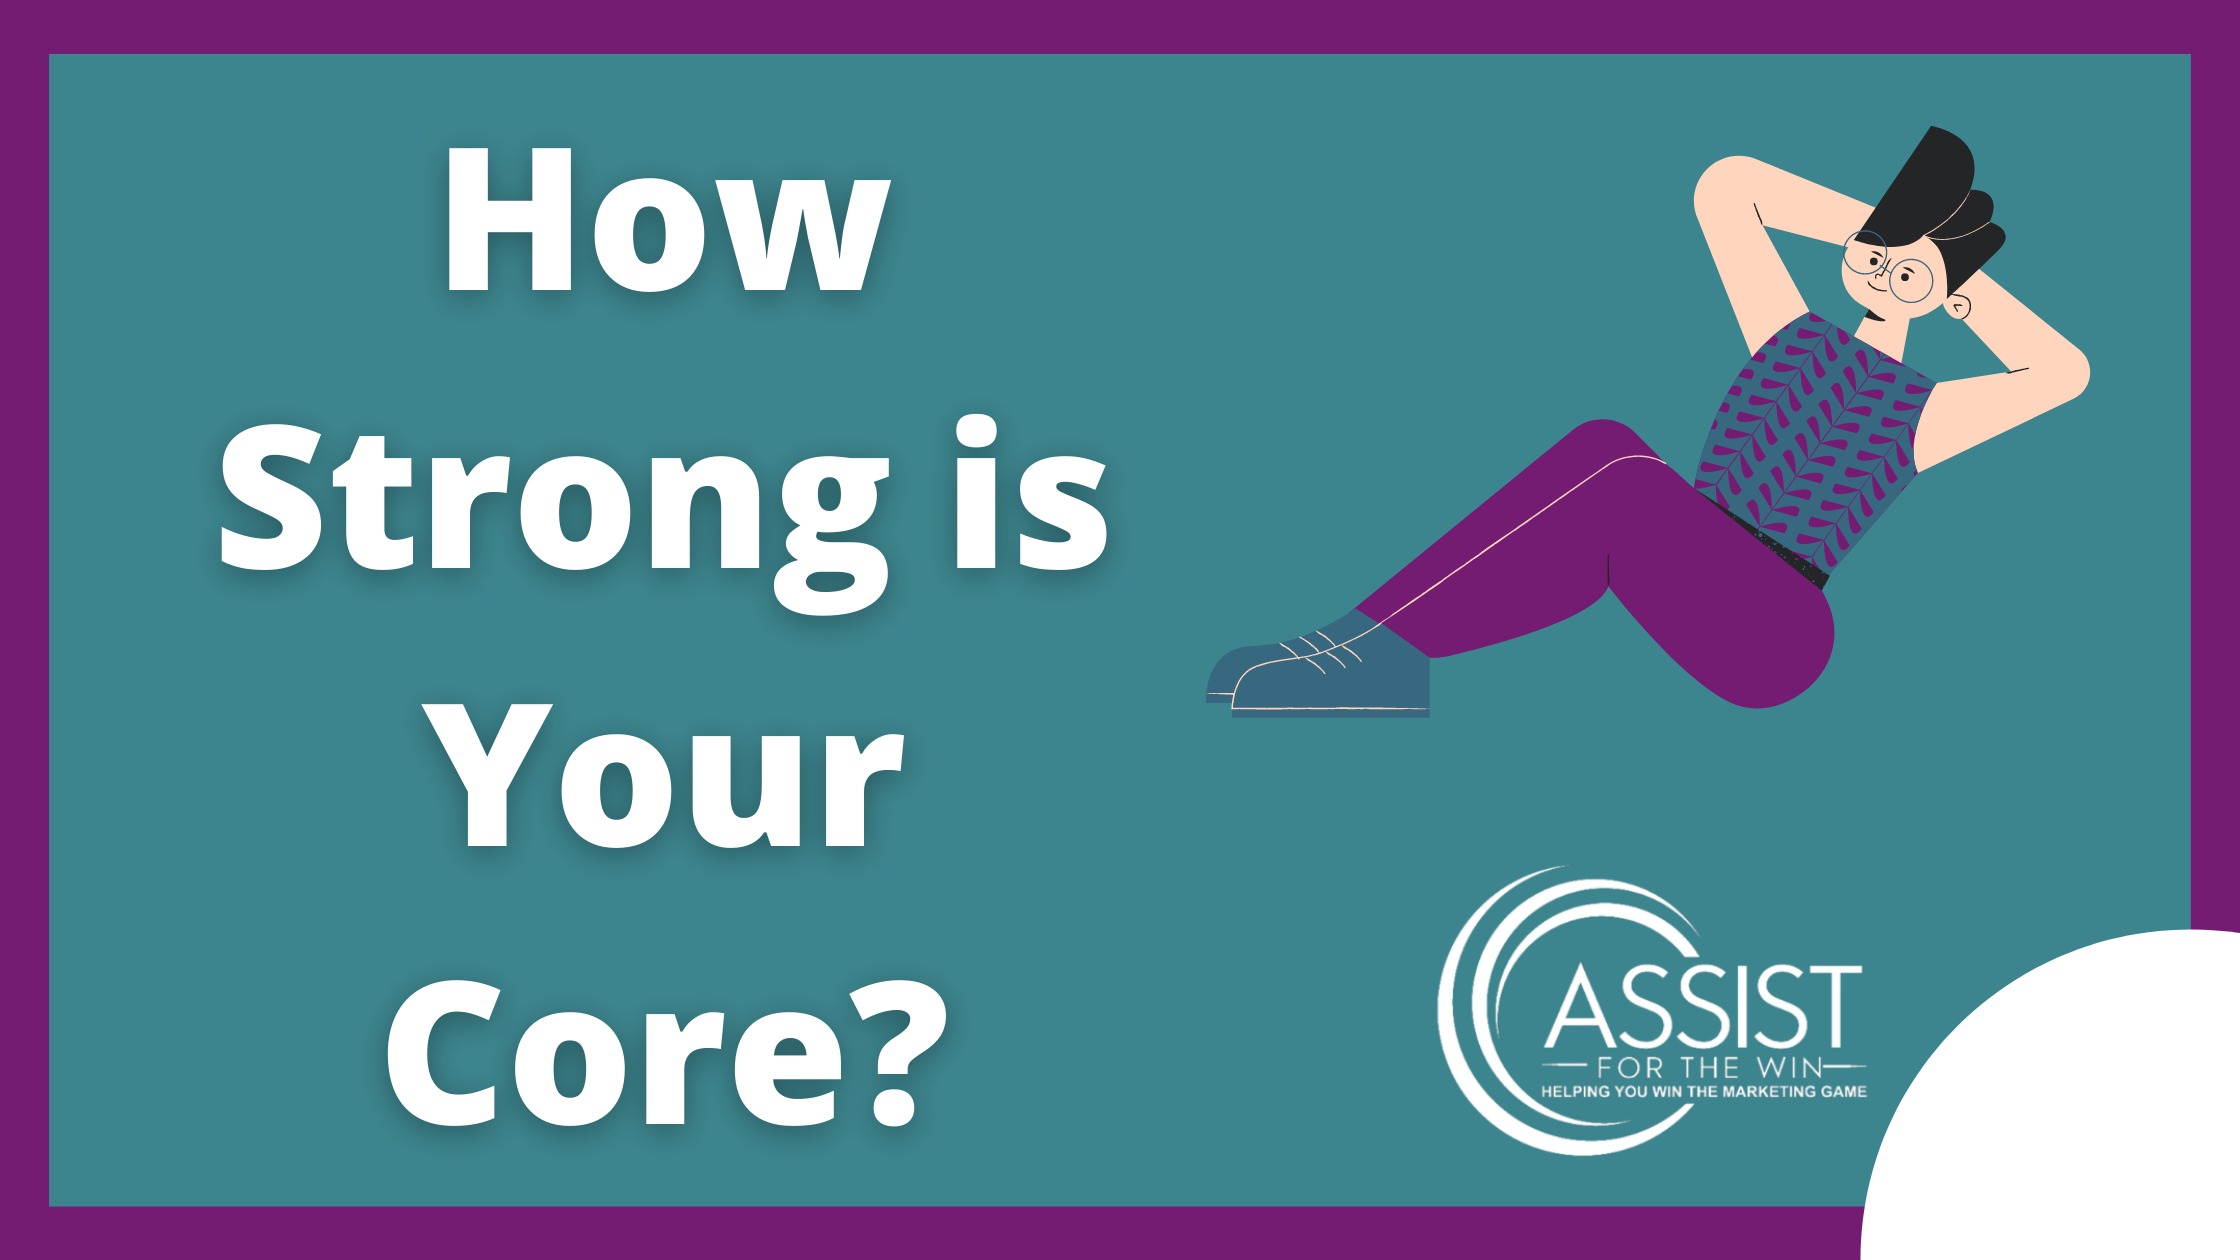 How Strong is Your Core?